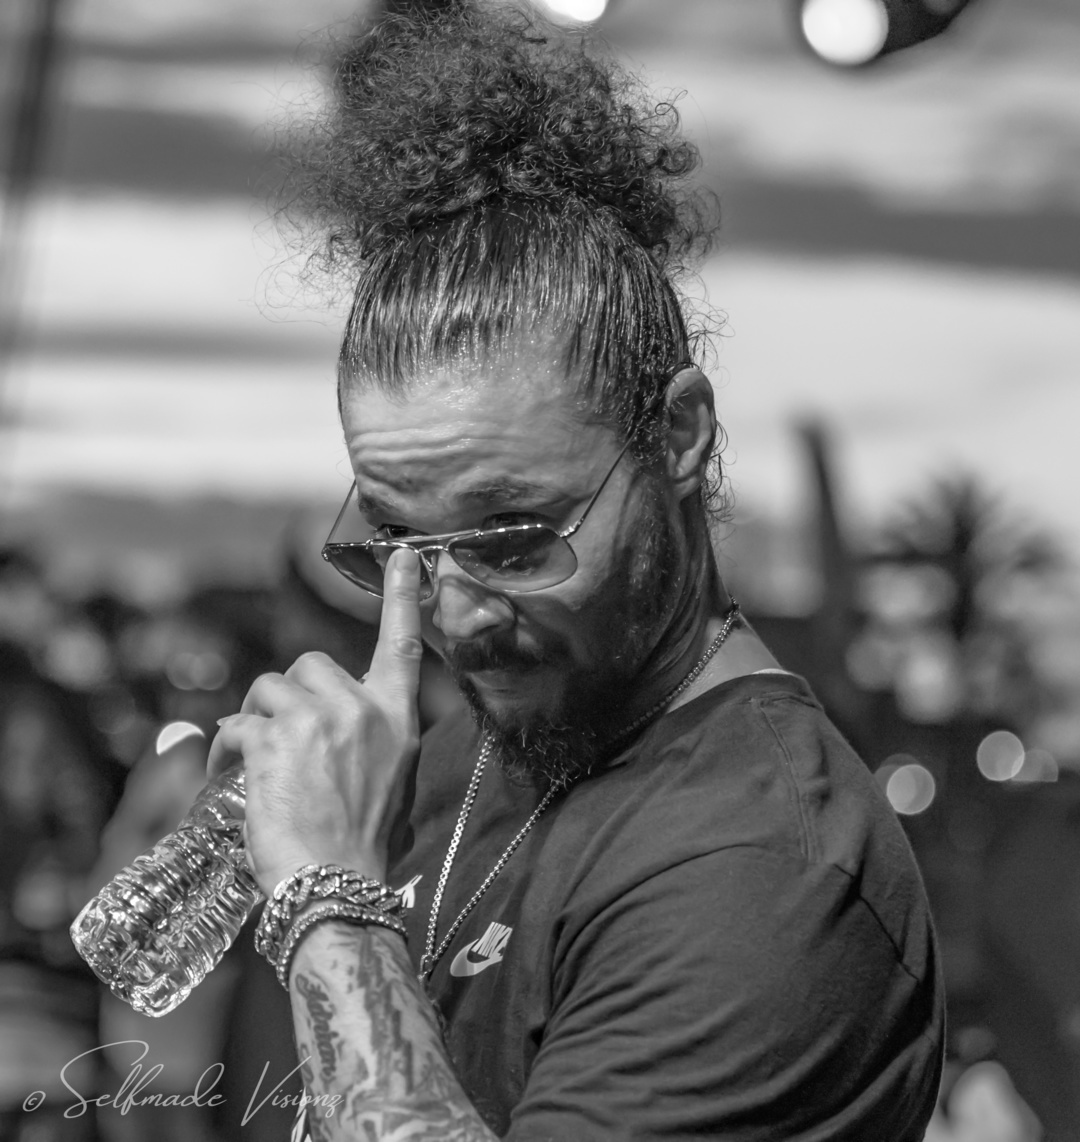 Bizzy Bone Biography, Age, Images, Height, Net Worth » Bioofy